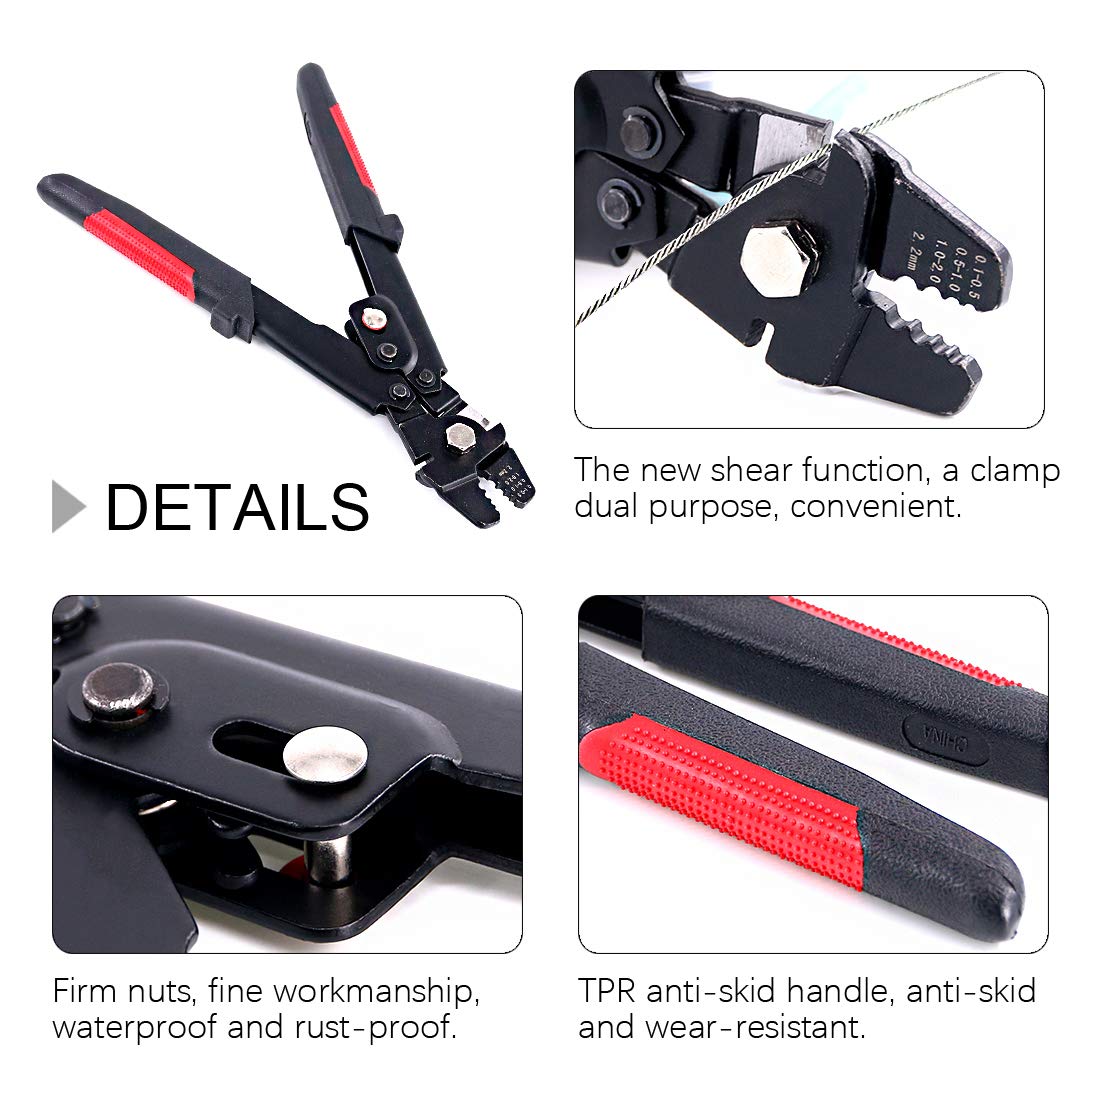 Swpeet Profession Up To 2.2mm Wire Rope Crimping Tool Wire Rope Swager Crimpers Fishing Crimping Tool With 150Pcs 3 Size Aluminum Double Barrel Ferrule Crimping Loop Sleeve Kit